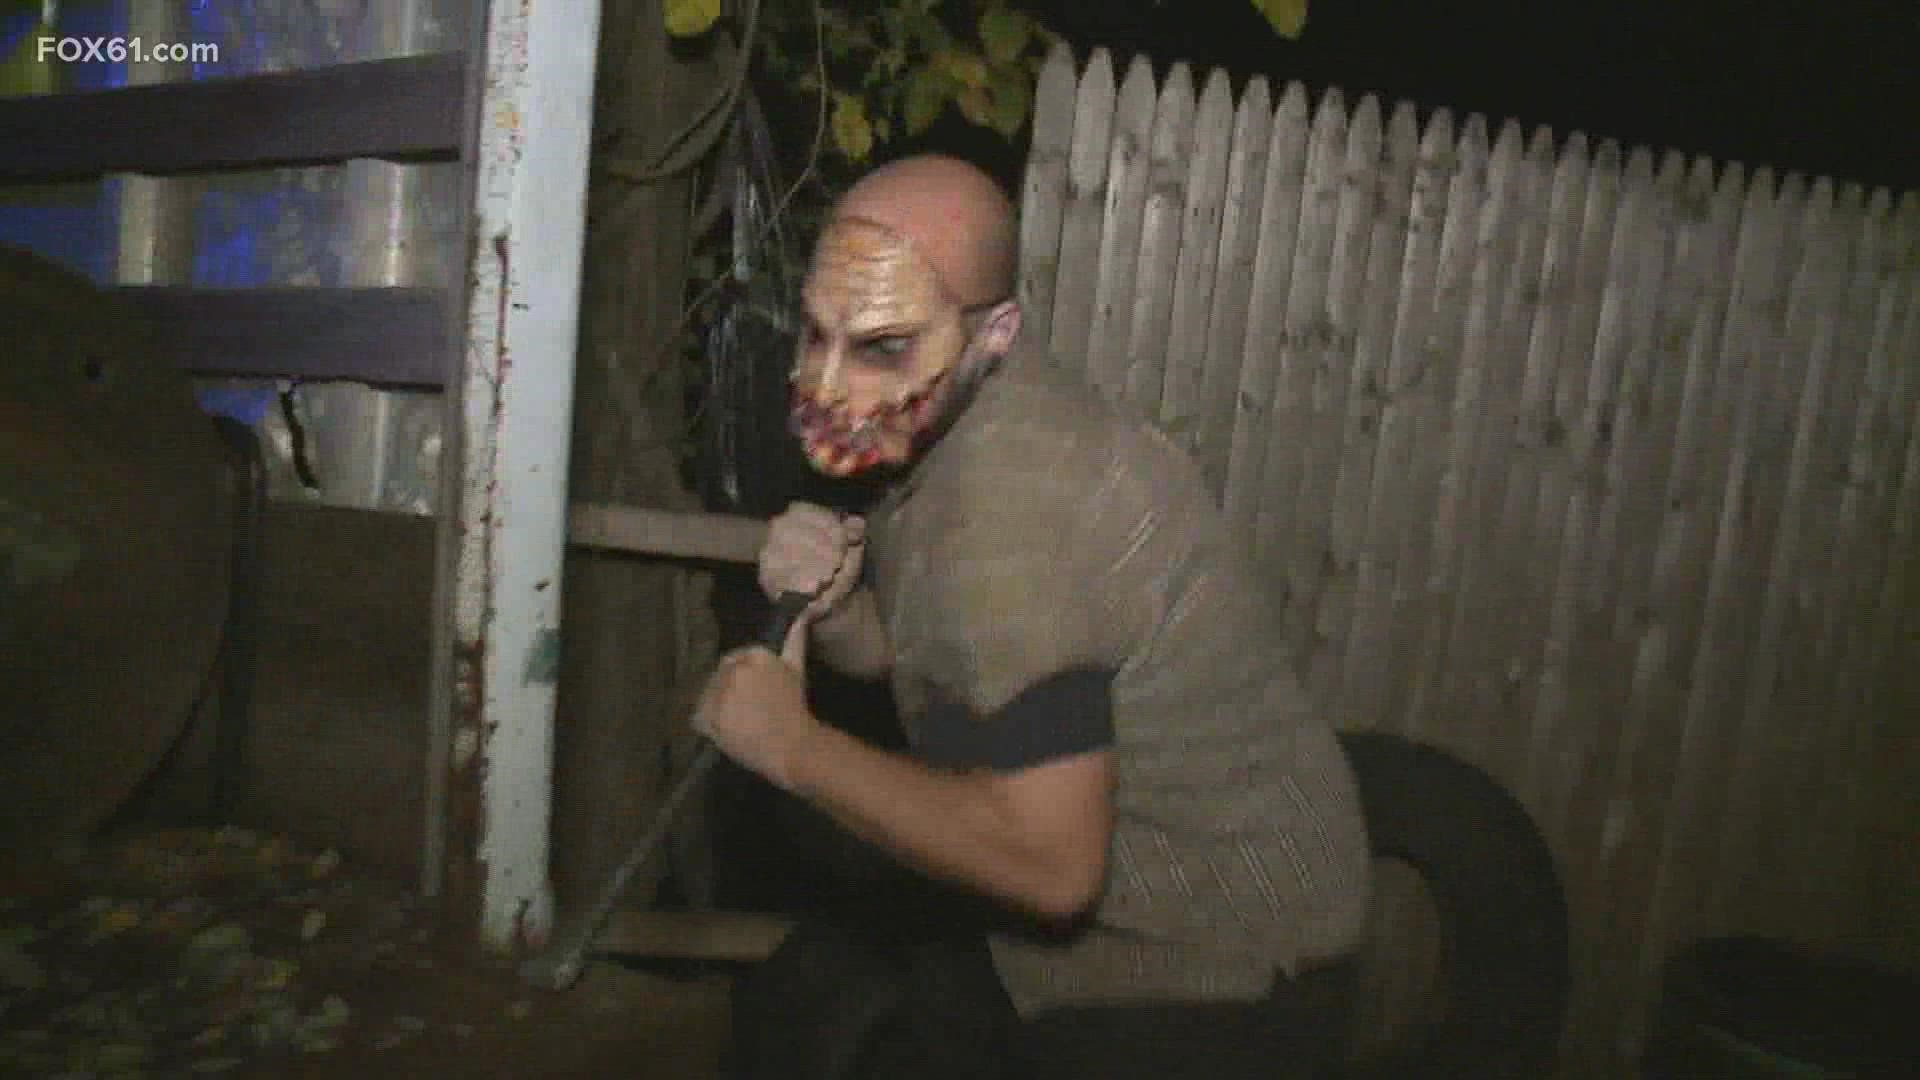 Spooky season is upon us! Nightmare Acres in South Windsor has risen back from the dead and is ready for Halloween haunts.